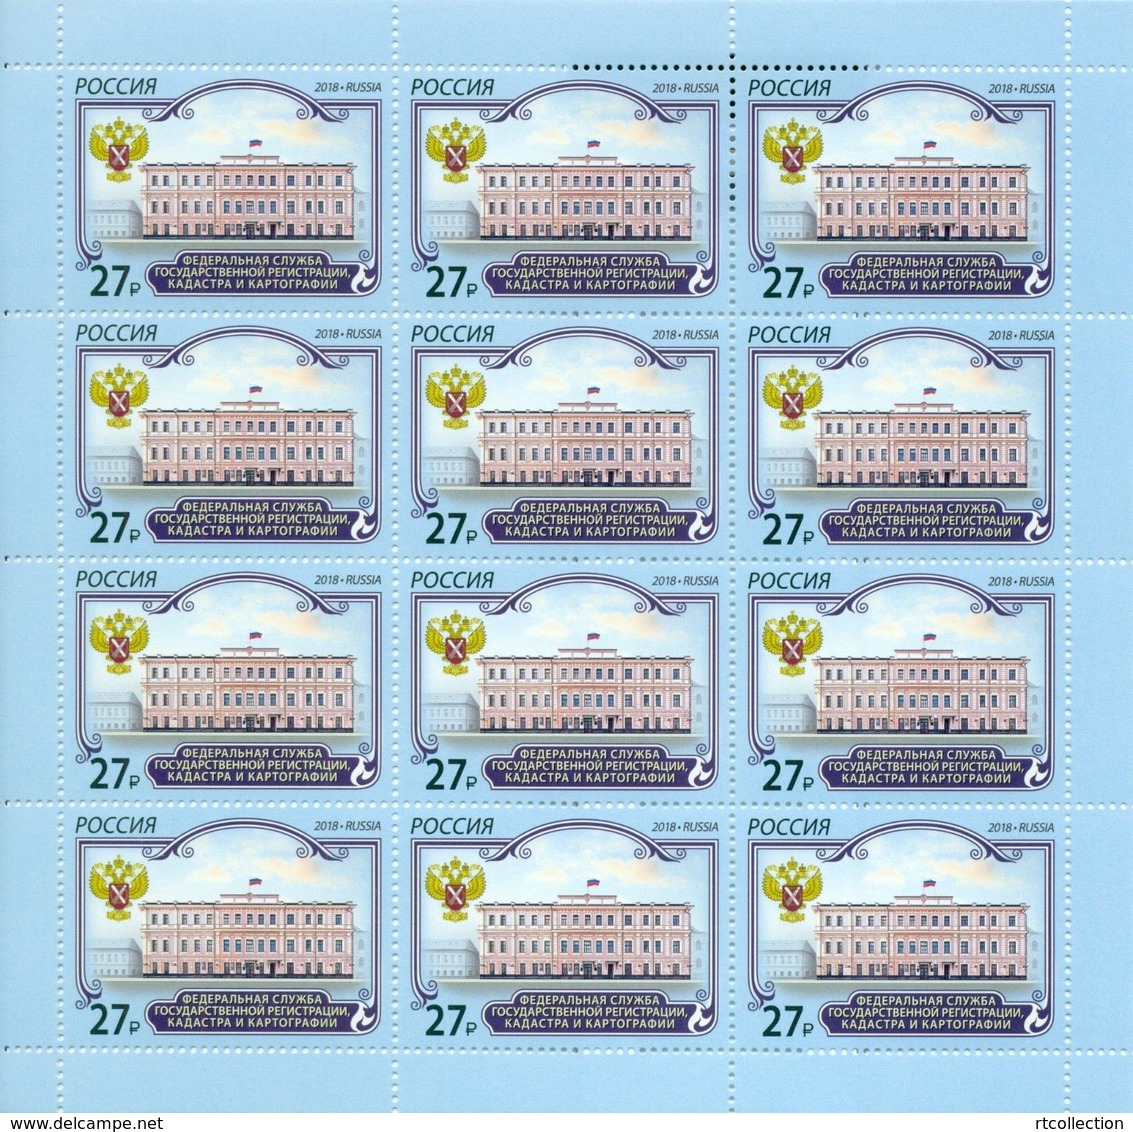 Russia 2018 Sheet Federal Service Of State Registration Cadastre Cartography Place Architecture Organizations Stamps MNH - Hojas Completas